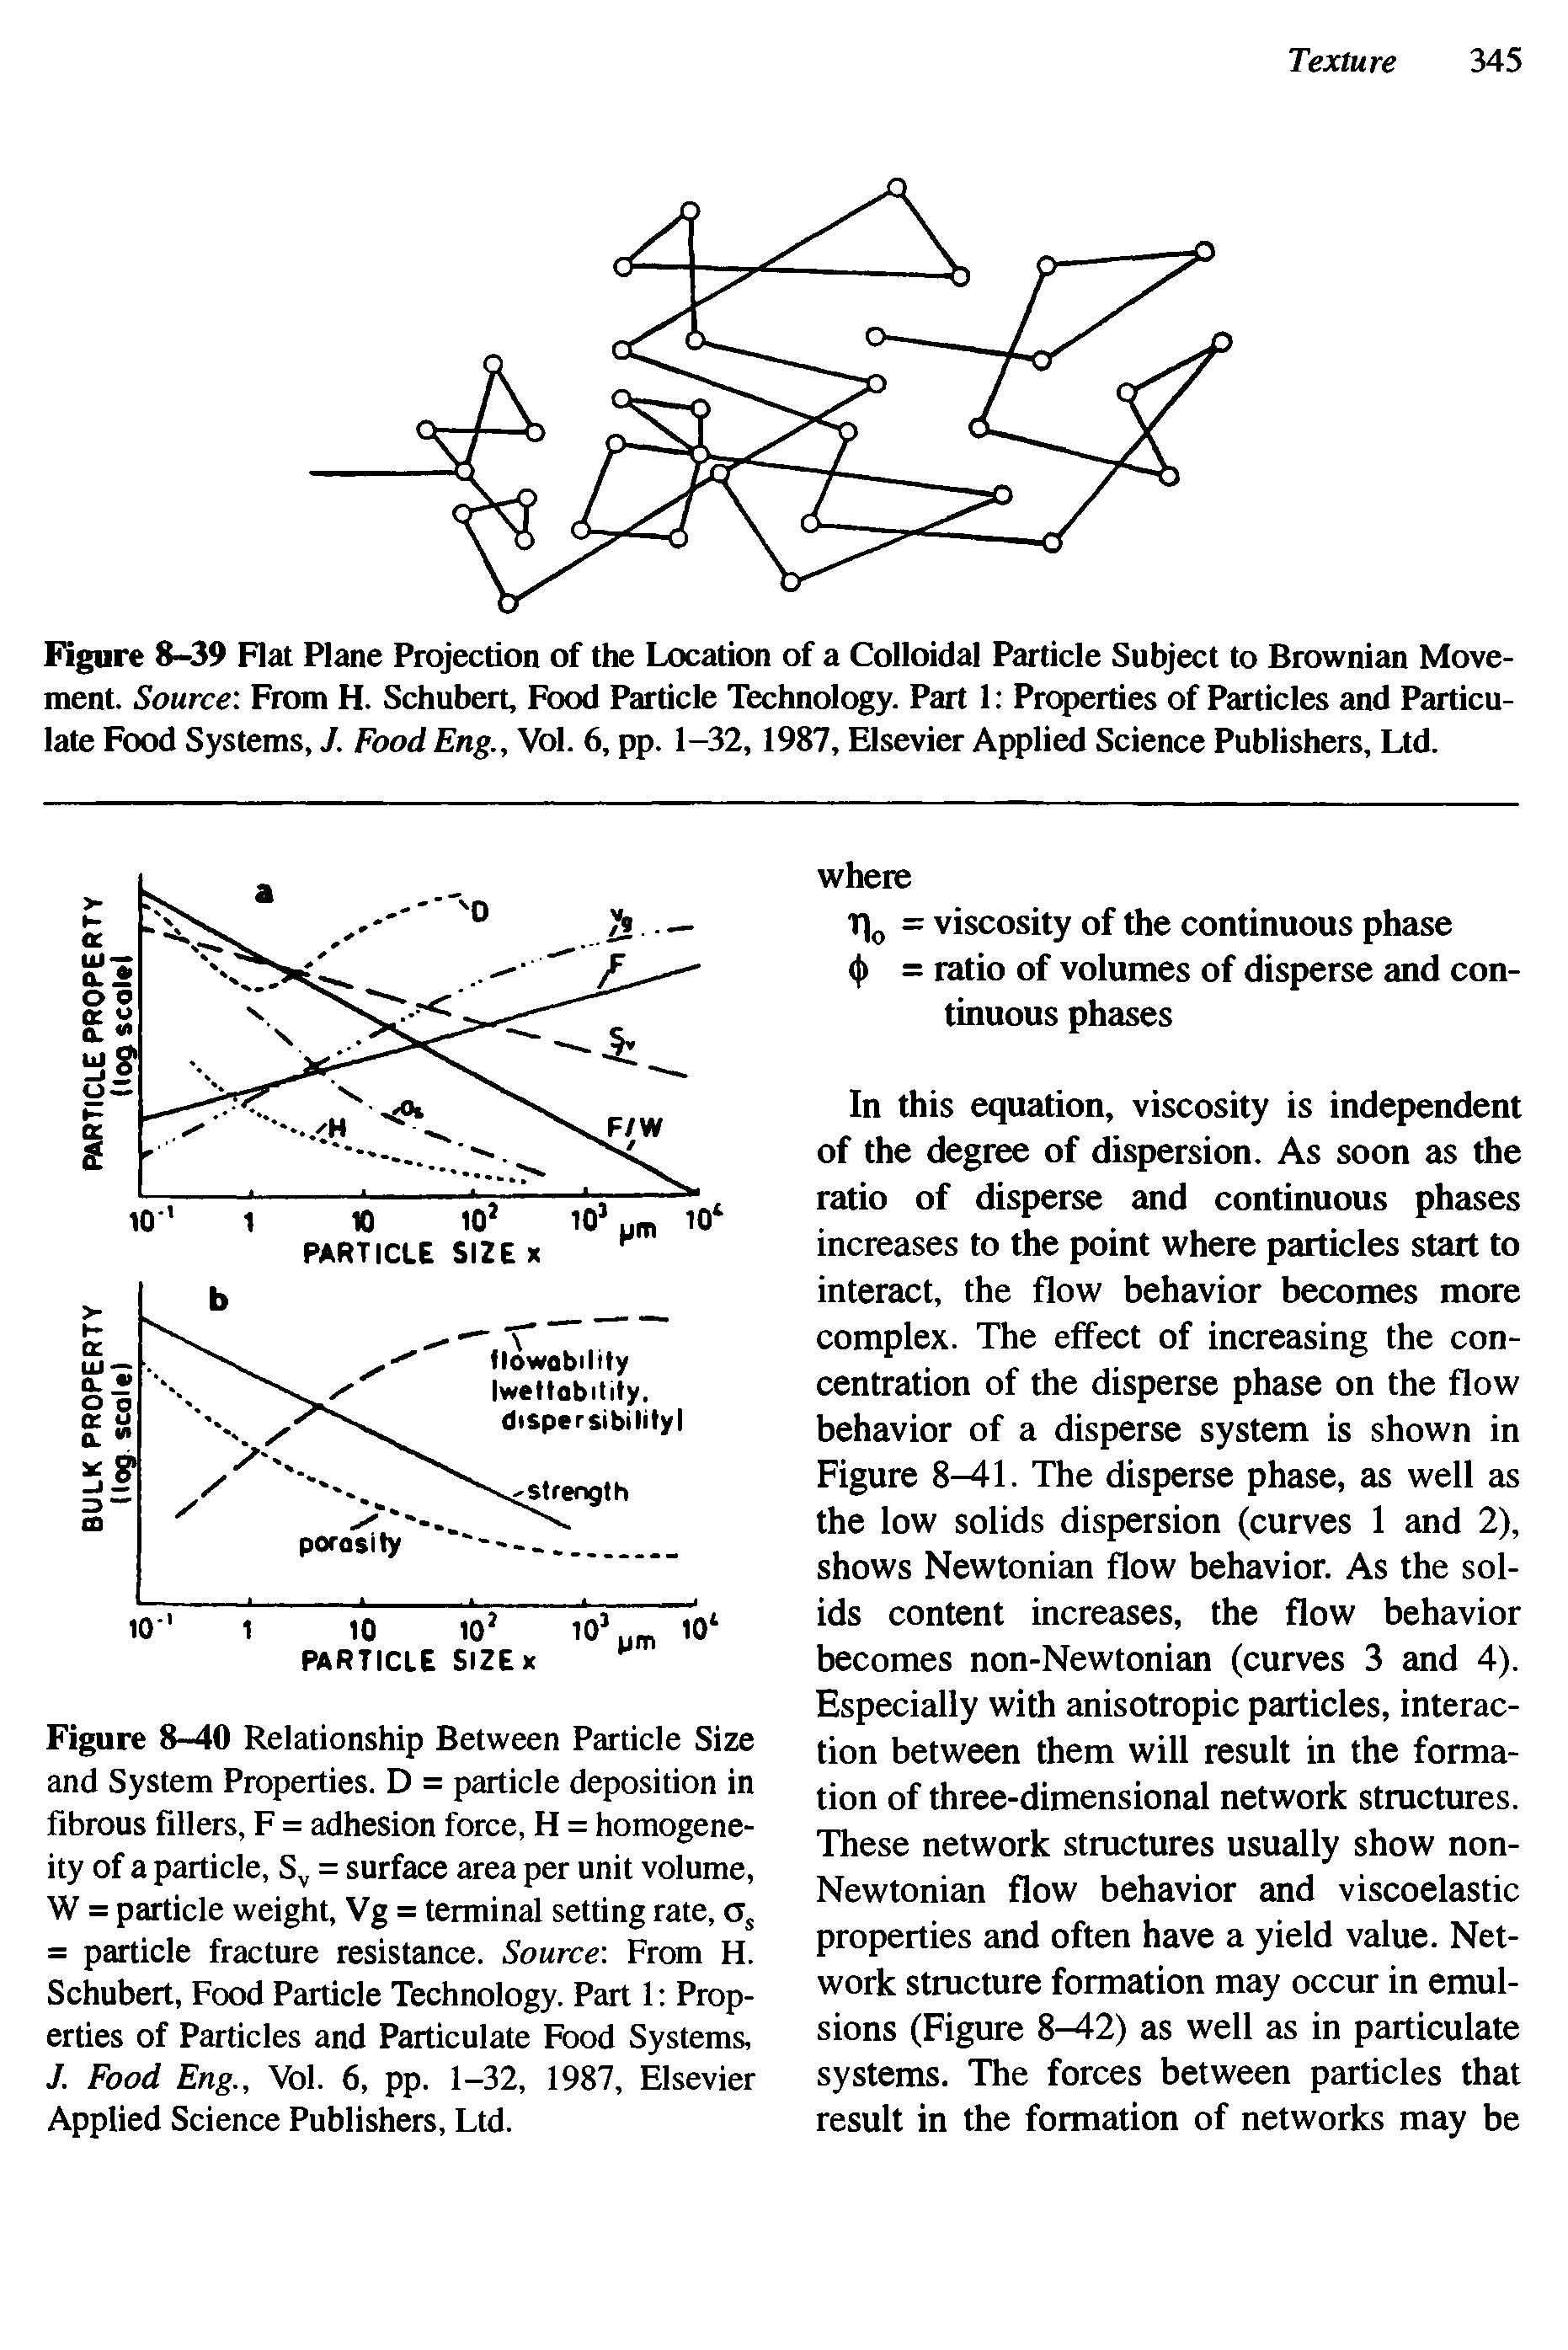 Figure 8-39 Flat Plane Projection of the Location of a Colloidal Particle Subject to Brownian Movement. Source From H. Schubert, Food Particle Technology. Part 1 Properties of Particles and Particulate Food Systems, J. Food Eng., Vol. 6, pp. 1-32,1987, Elsevier Applied Science Publishers, Ltd.